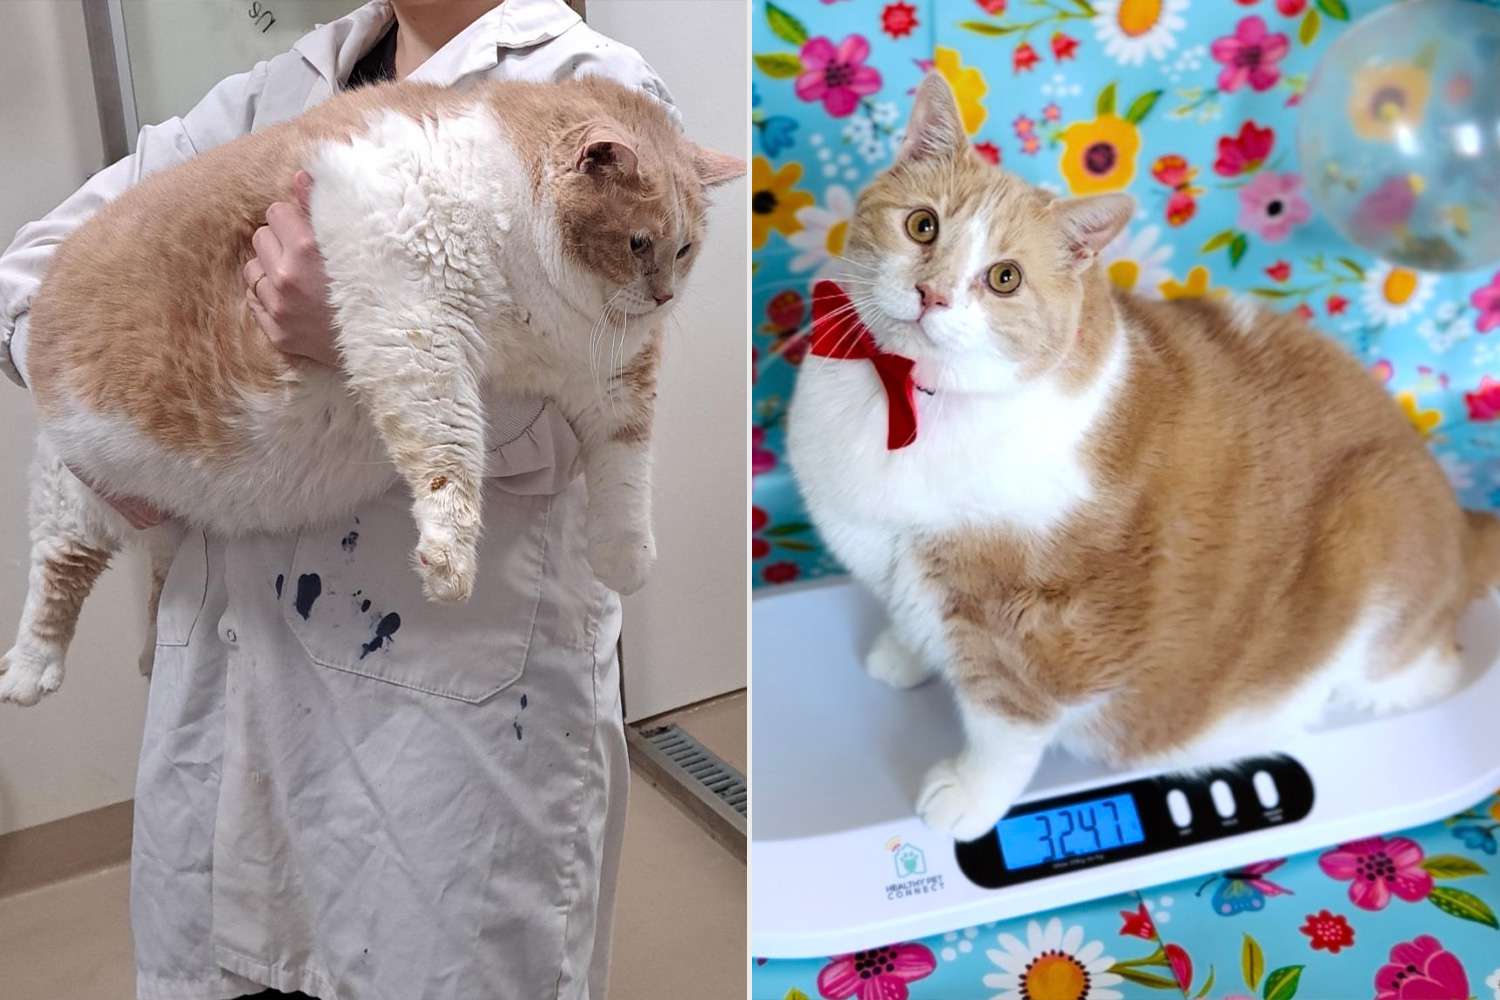 Canadian Cat Named Axel 'Biggie Smalls' Has Weight Loss Journey Documented — and Becomes a TikTok Star!